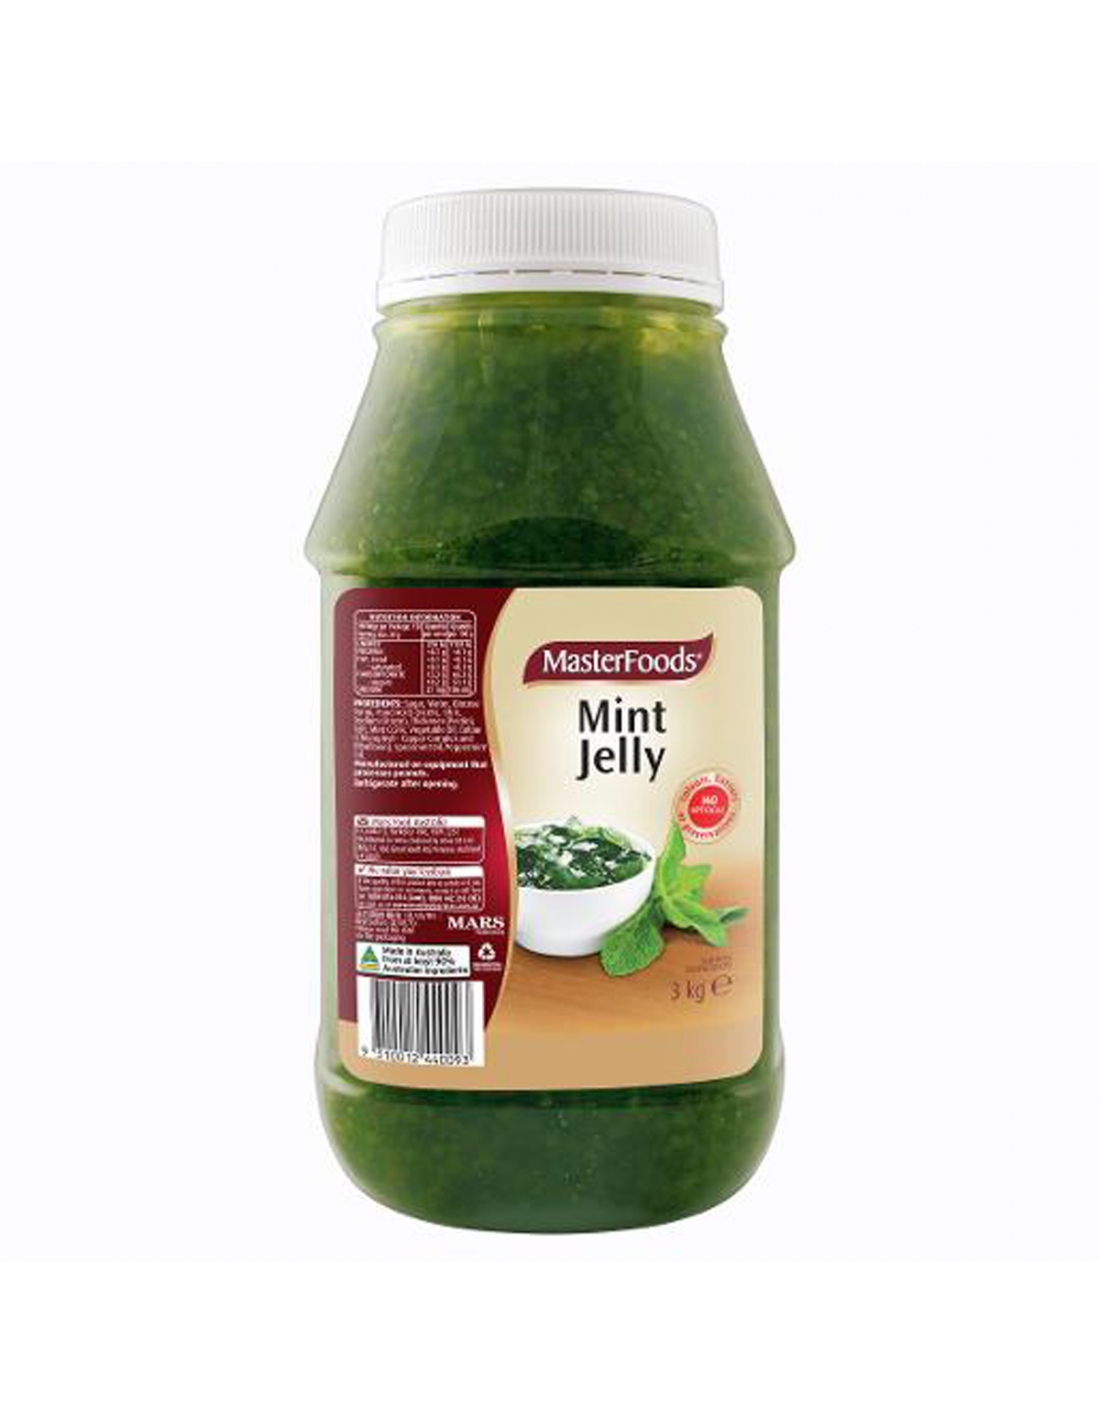 Masterfoods Mint Jelly Sauce 3kg